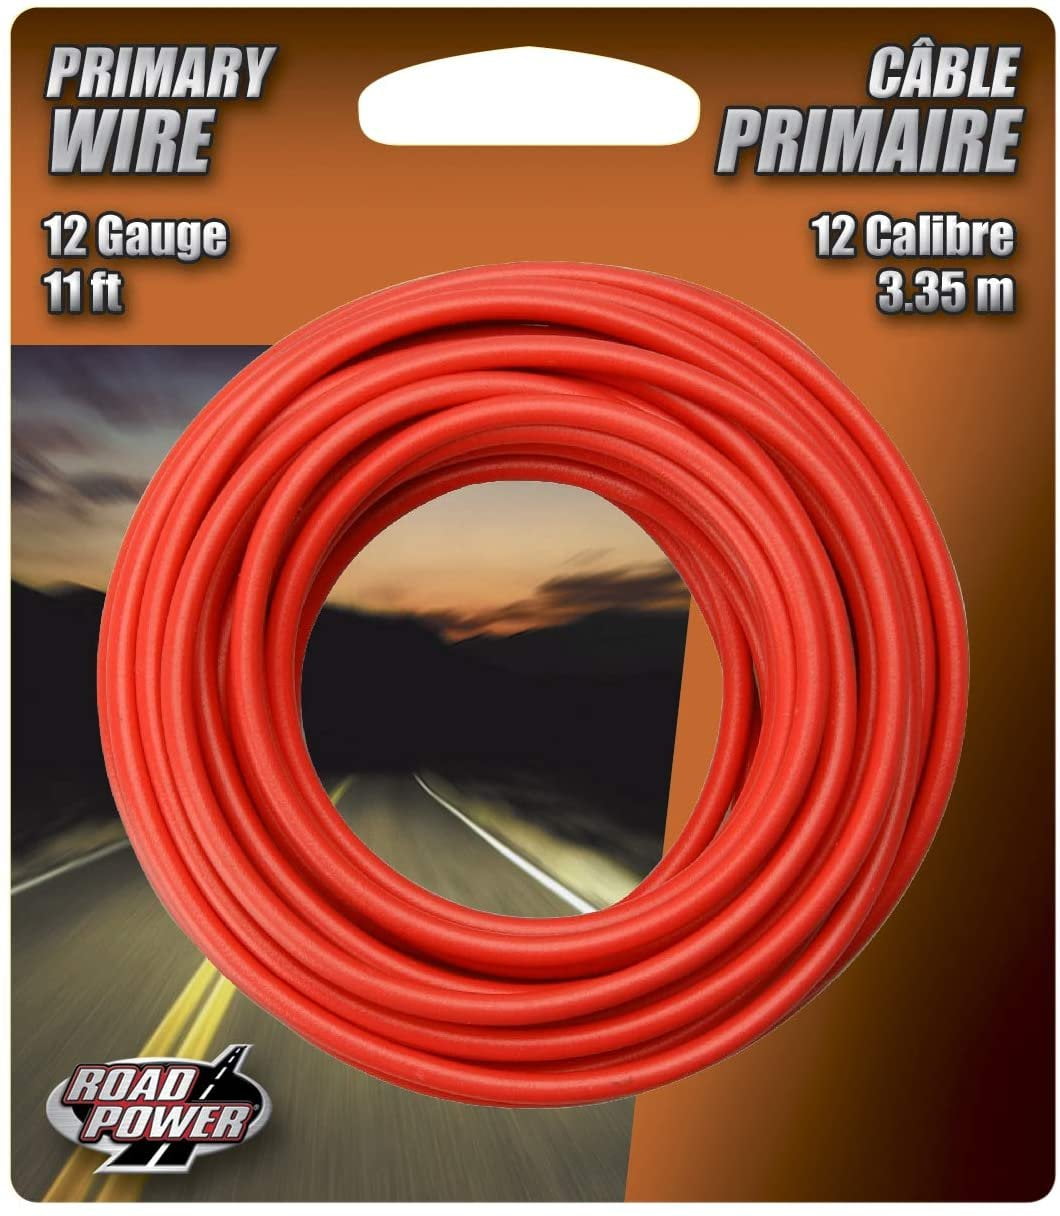 Road Power 55671533 12 Gauge, Red, 11-ft Automotive Copper Wire, 11